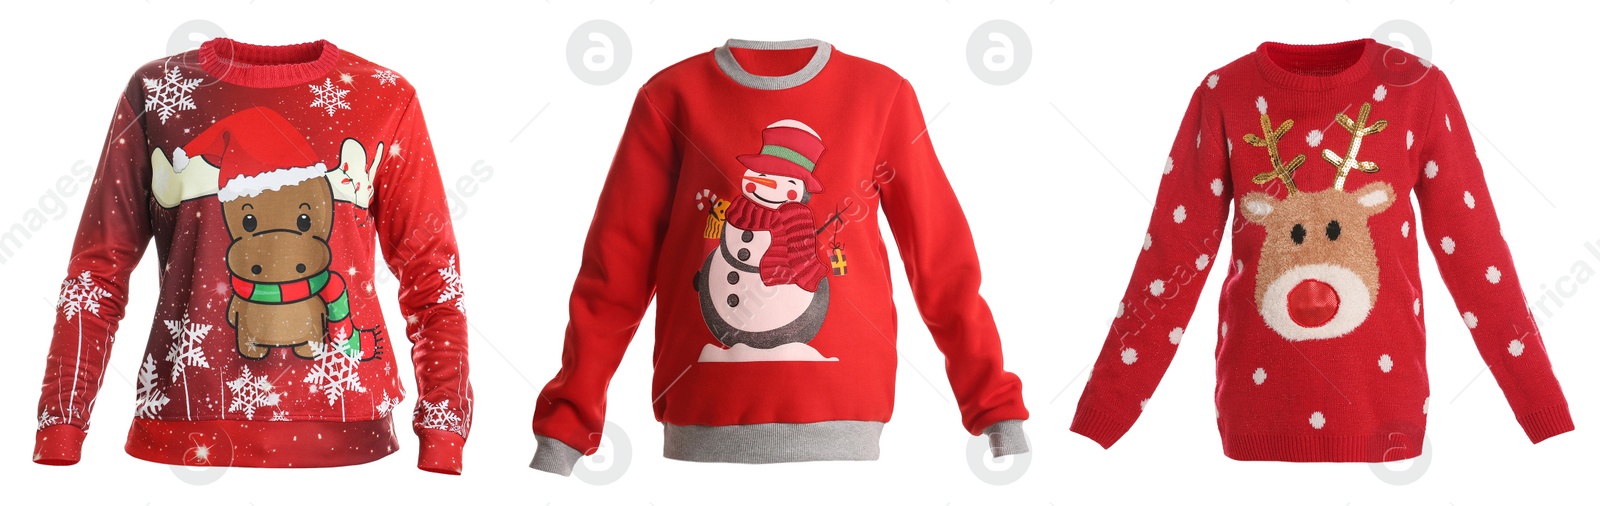 Image of Warm red Christmas sweaters on white background. Banner design